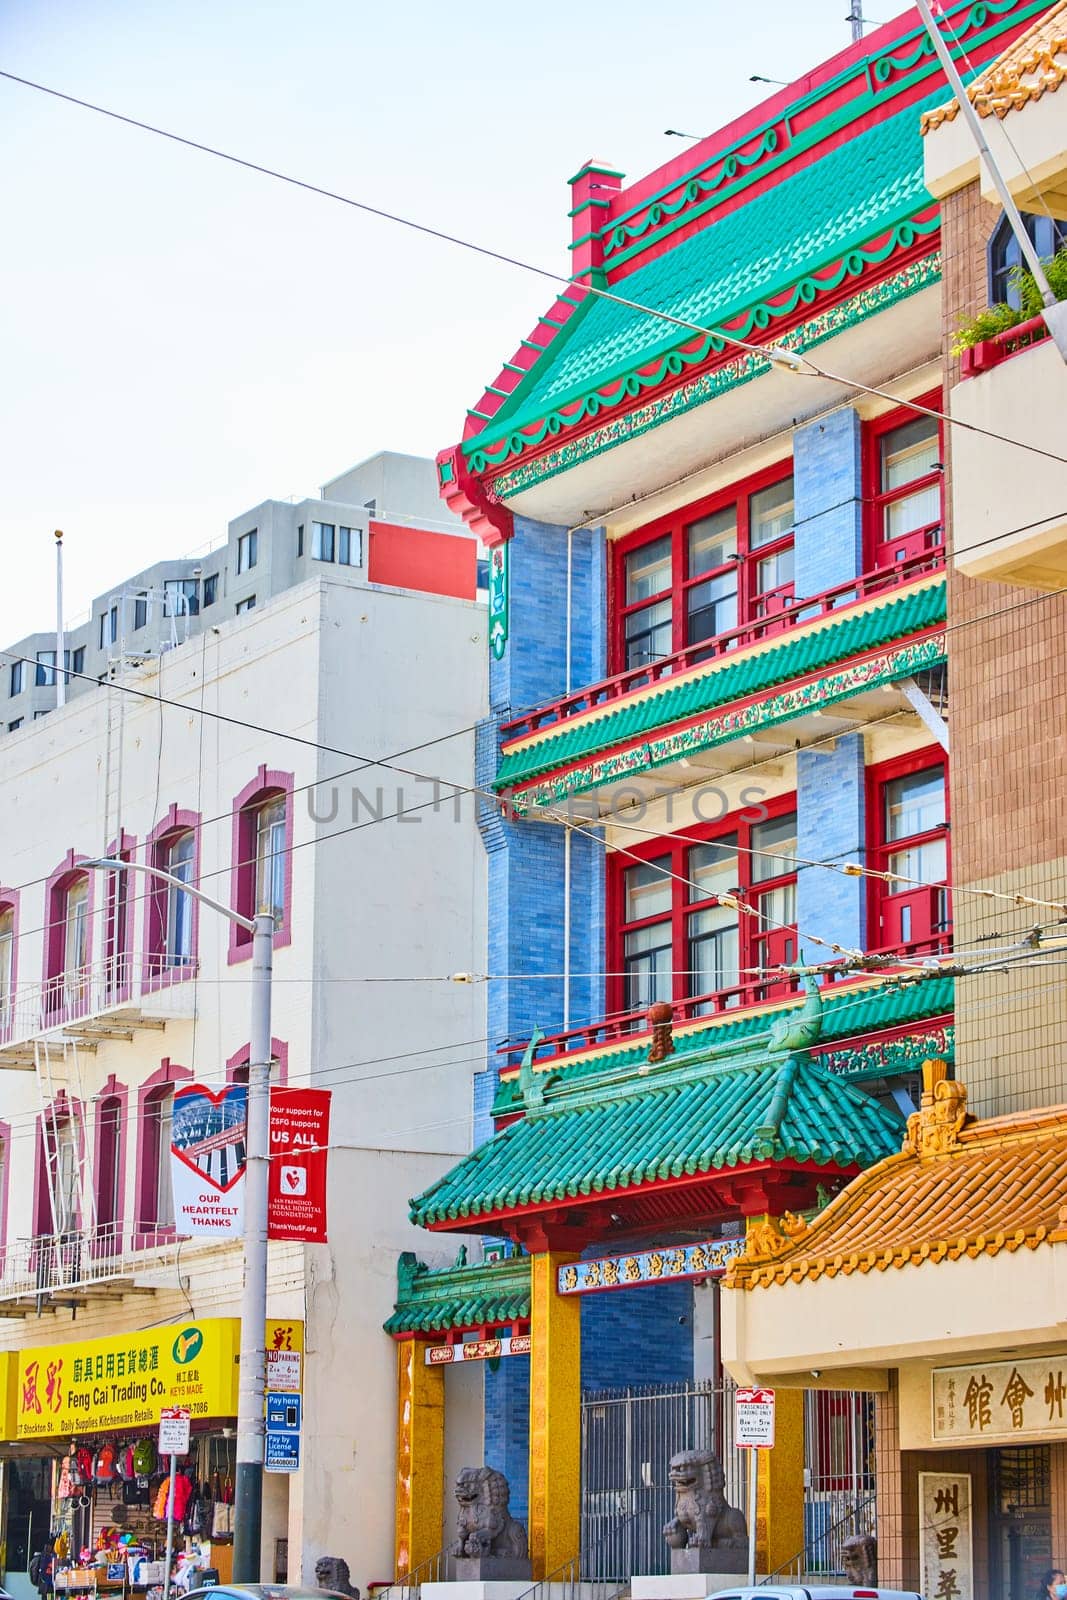 Image of Traditional Chinese building in Chinatown with green roof and red shutters and lion statues